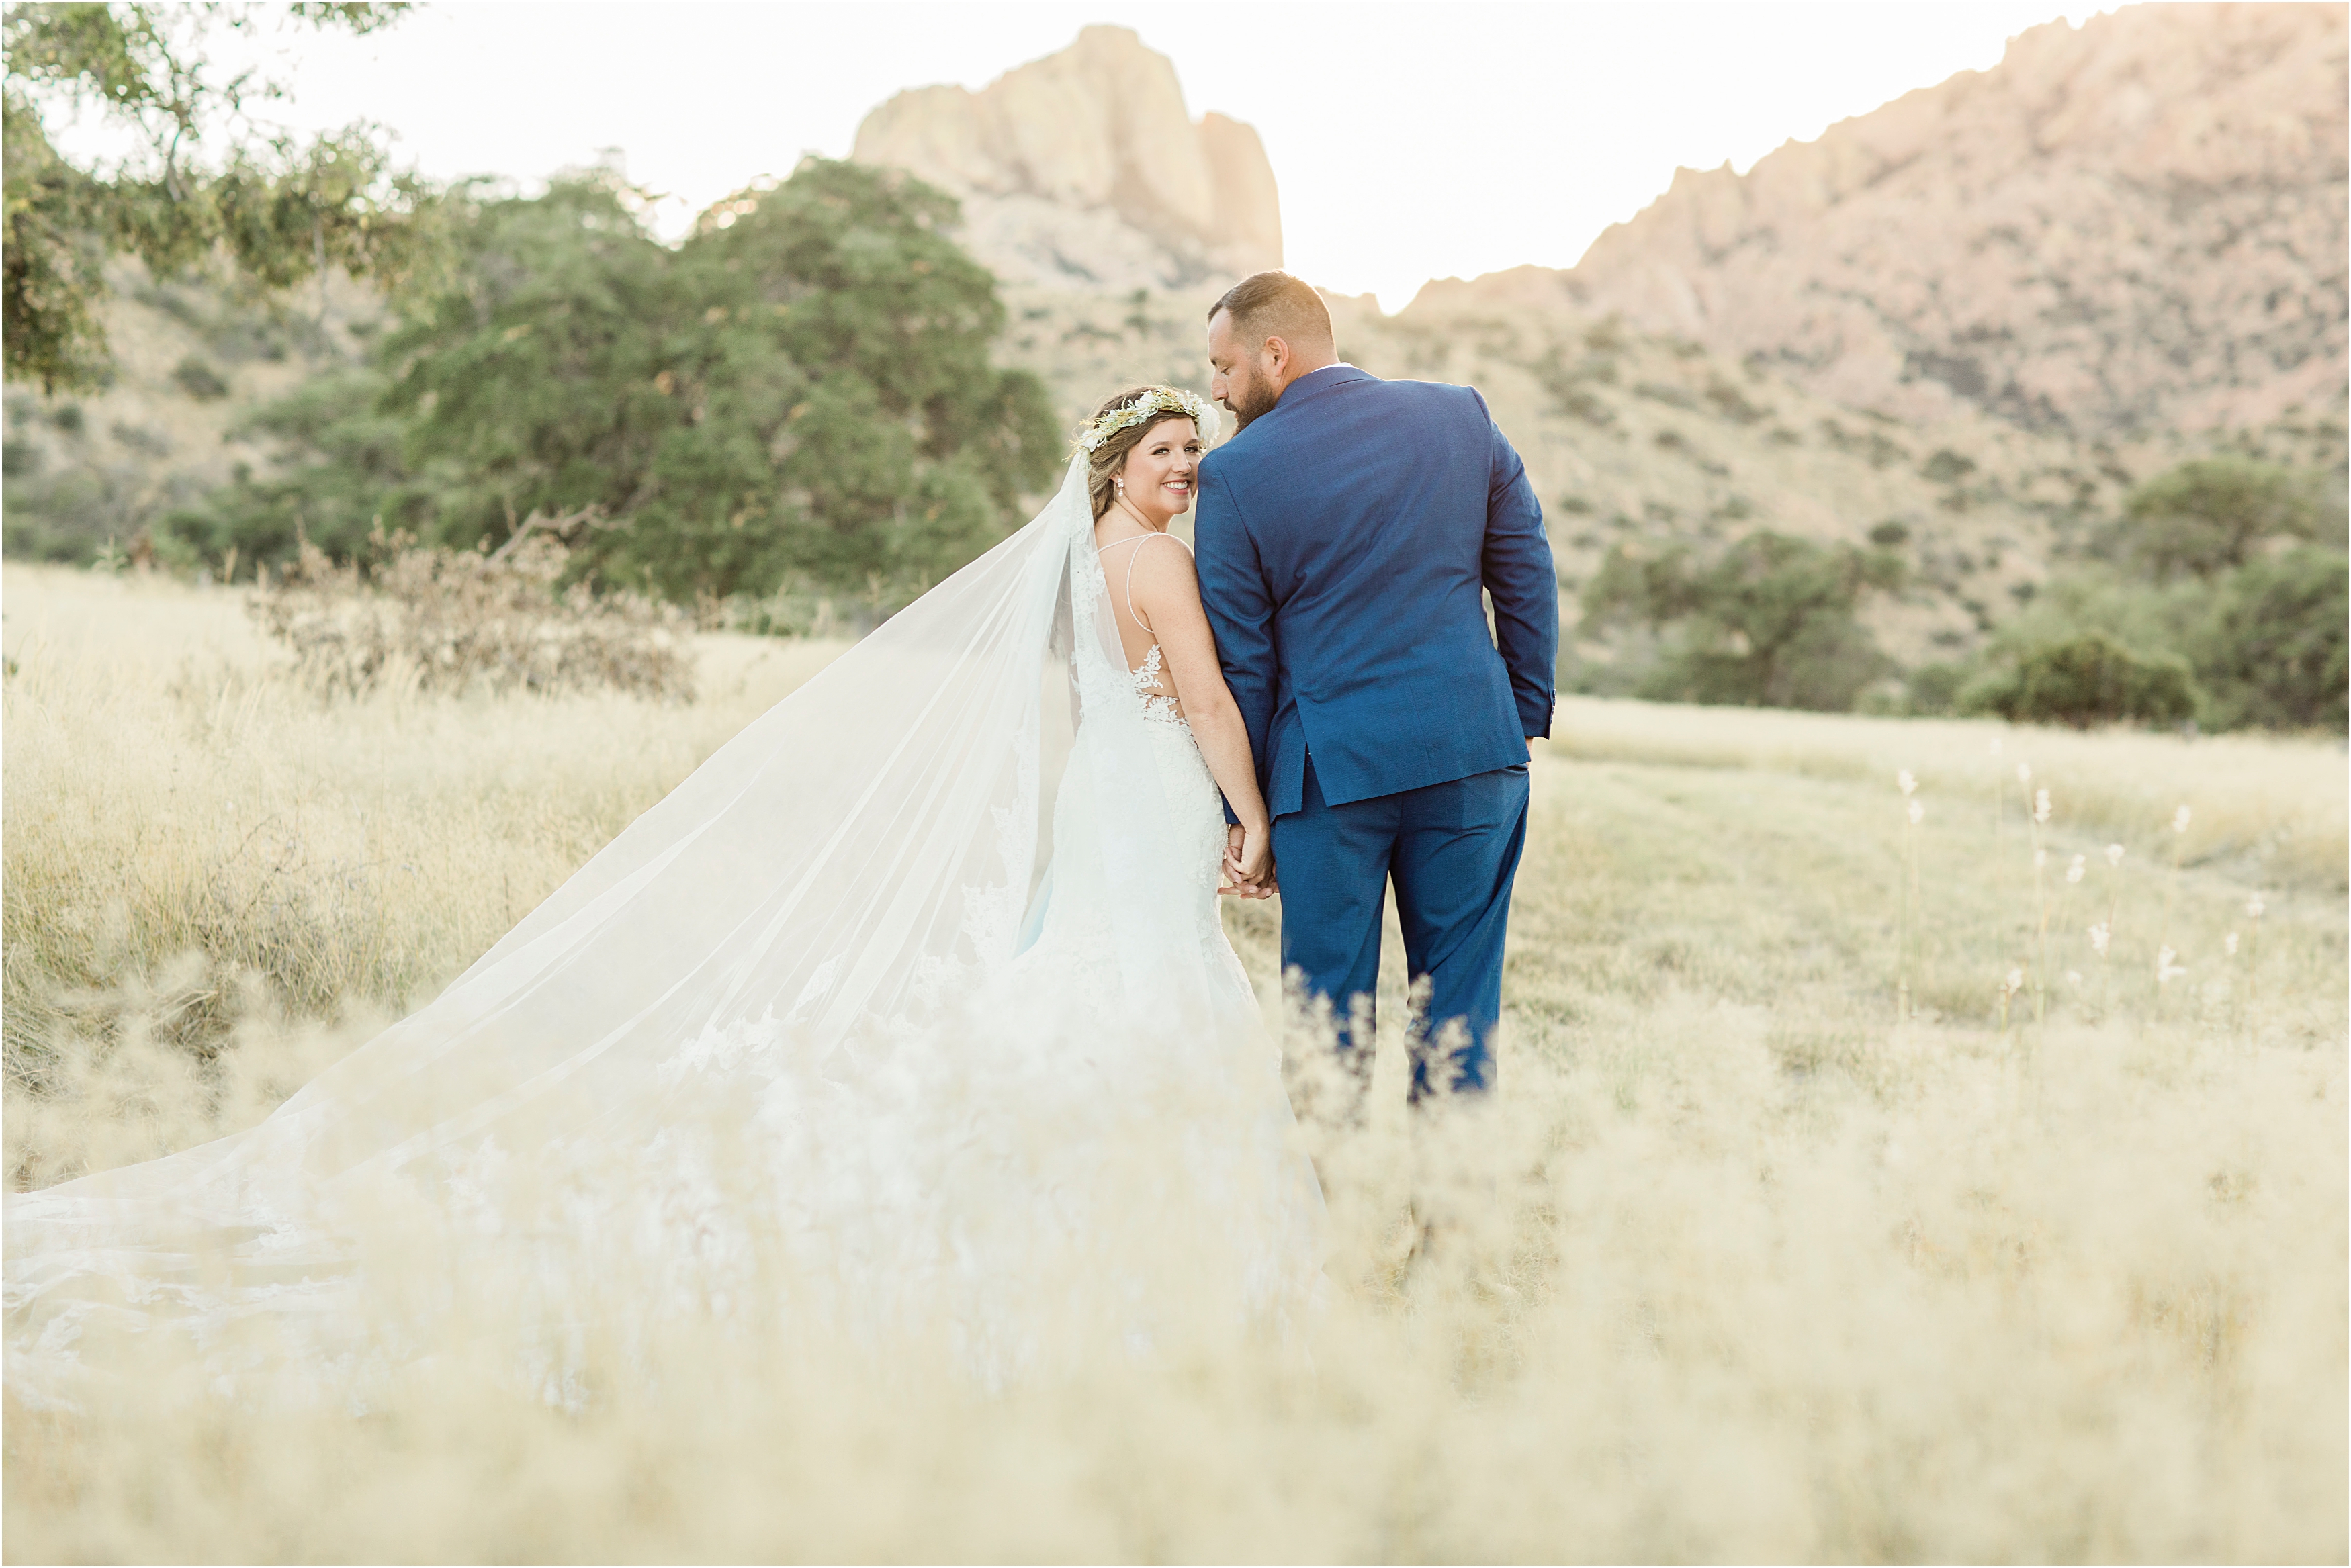 Boho Wedding in Cochise Stronghold Mountains, Pearce, Arizona with Amber Lea Photography.